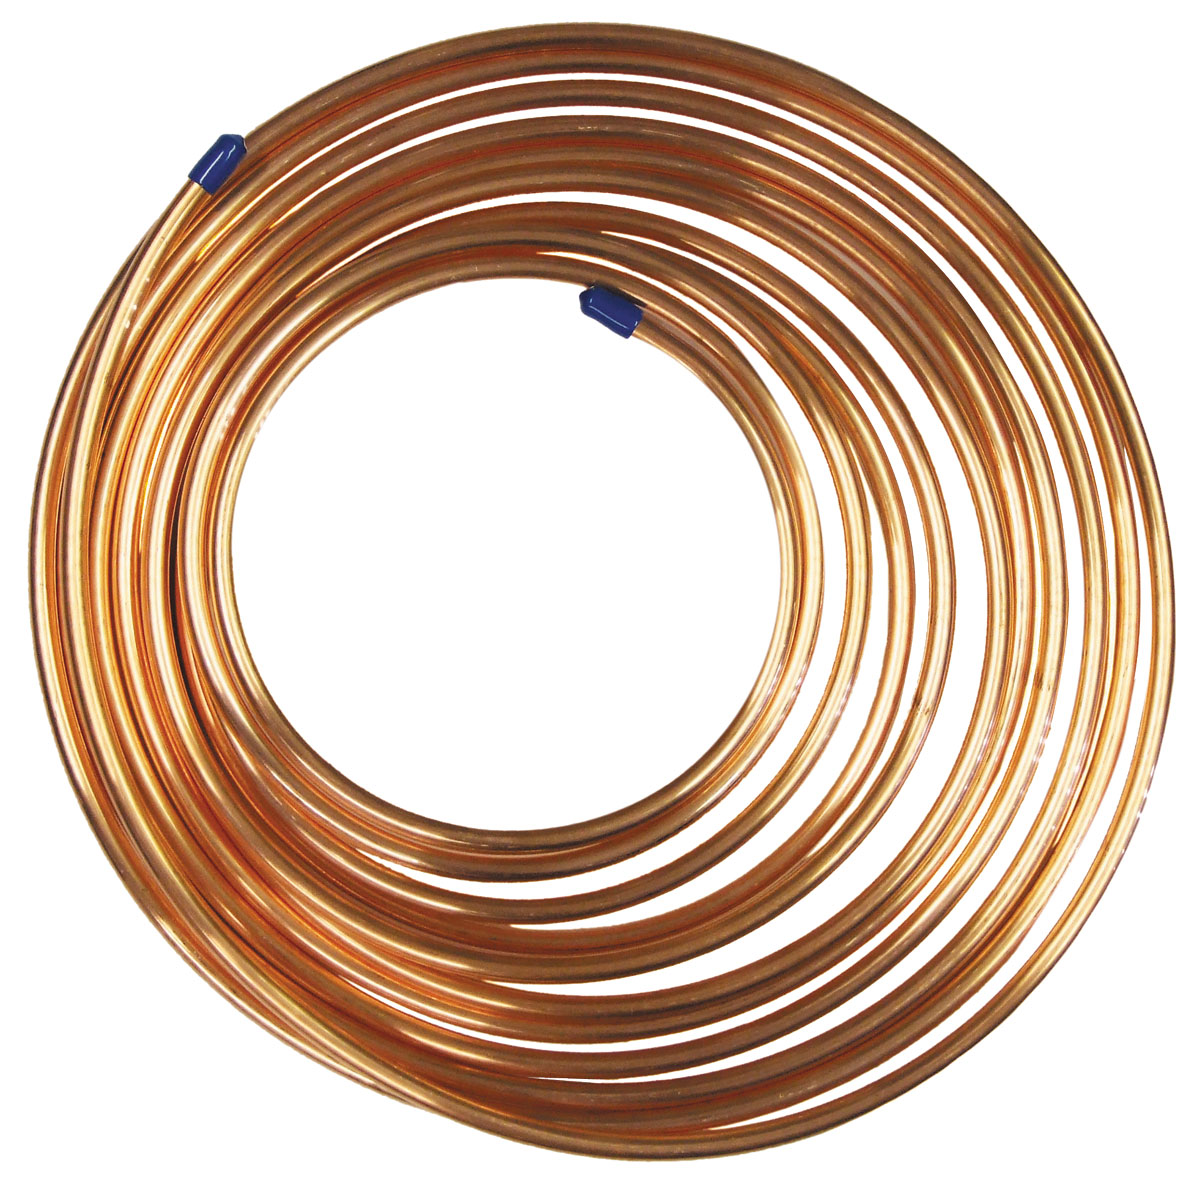 6mm OD Copper Tube (10mtrs)